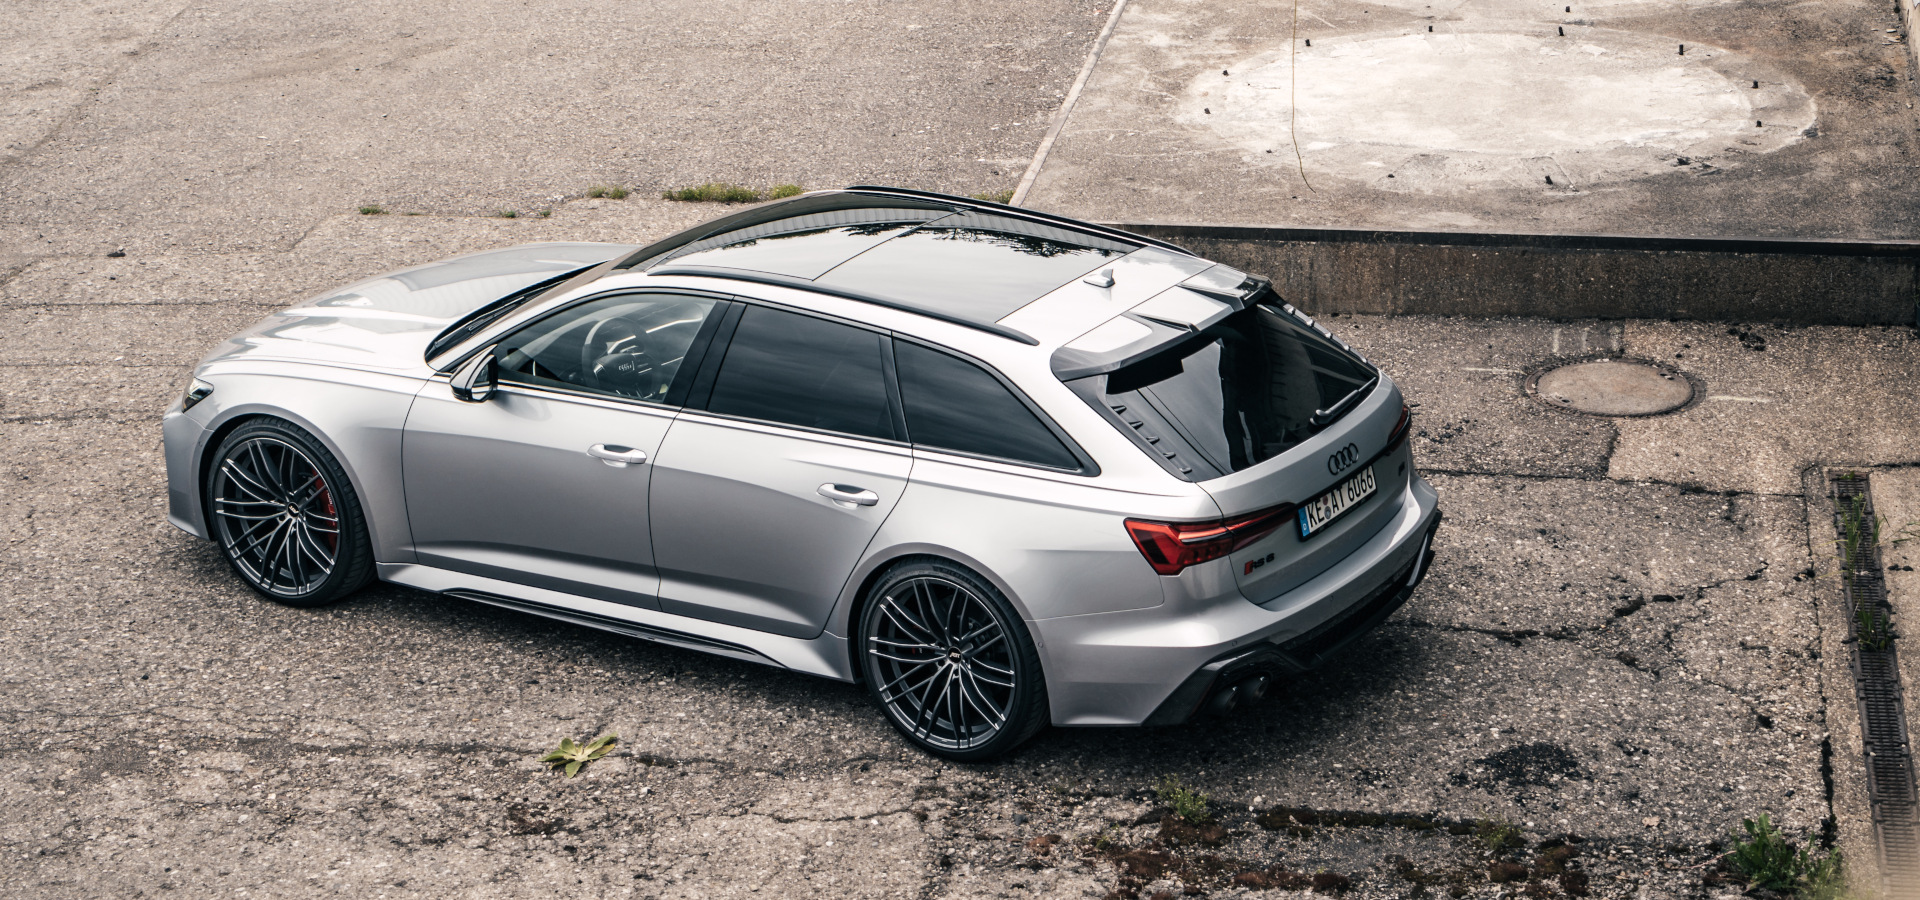 Audi RS6 Legacy Edition By Abt Tunes Wagon To 750 HP